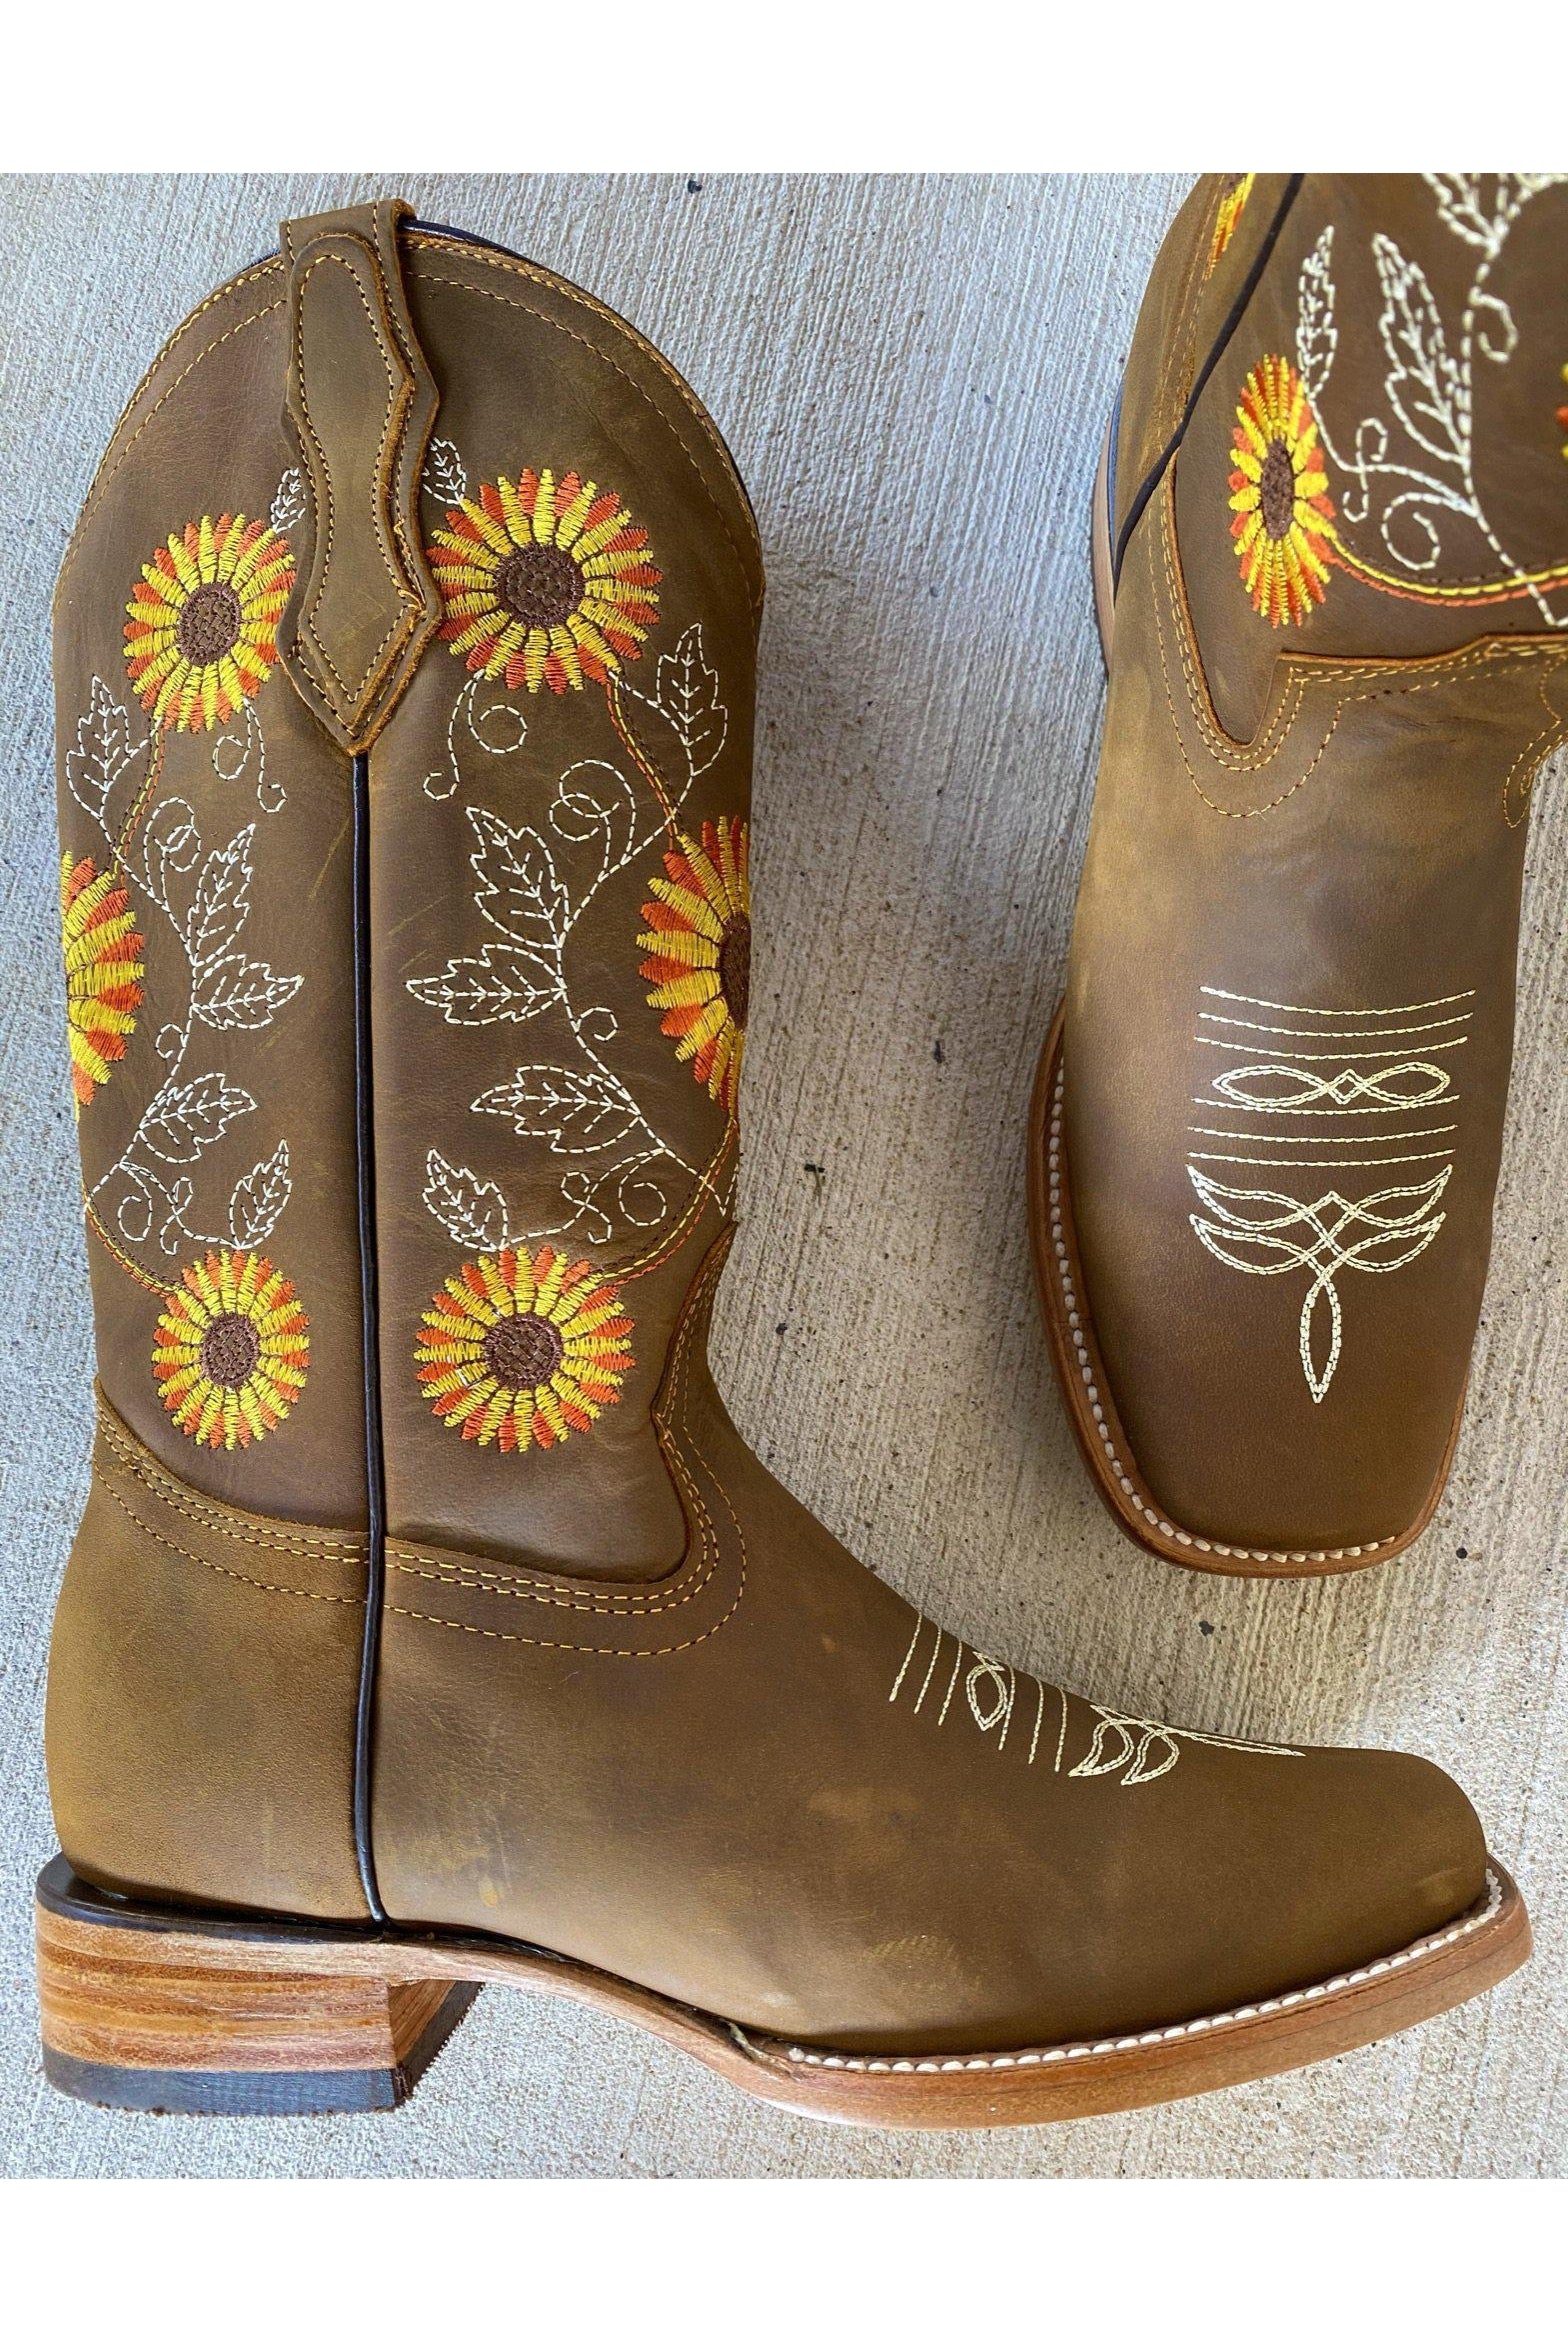 Cactus Country Women’s Golden Sunflower Boots – Cactus Western Wear